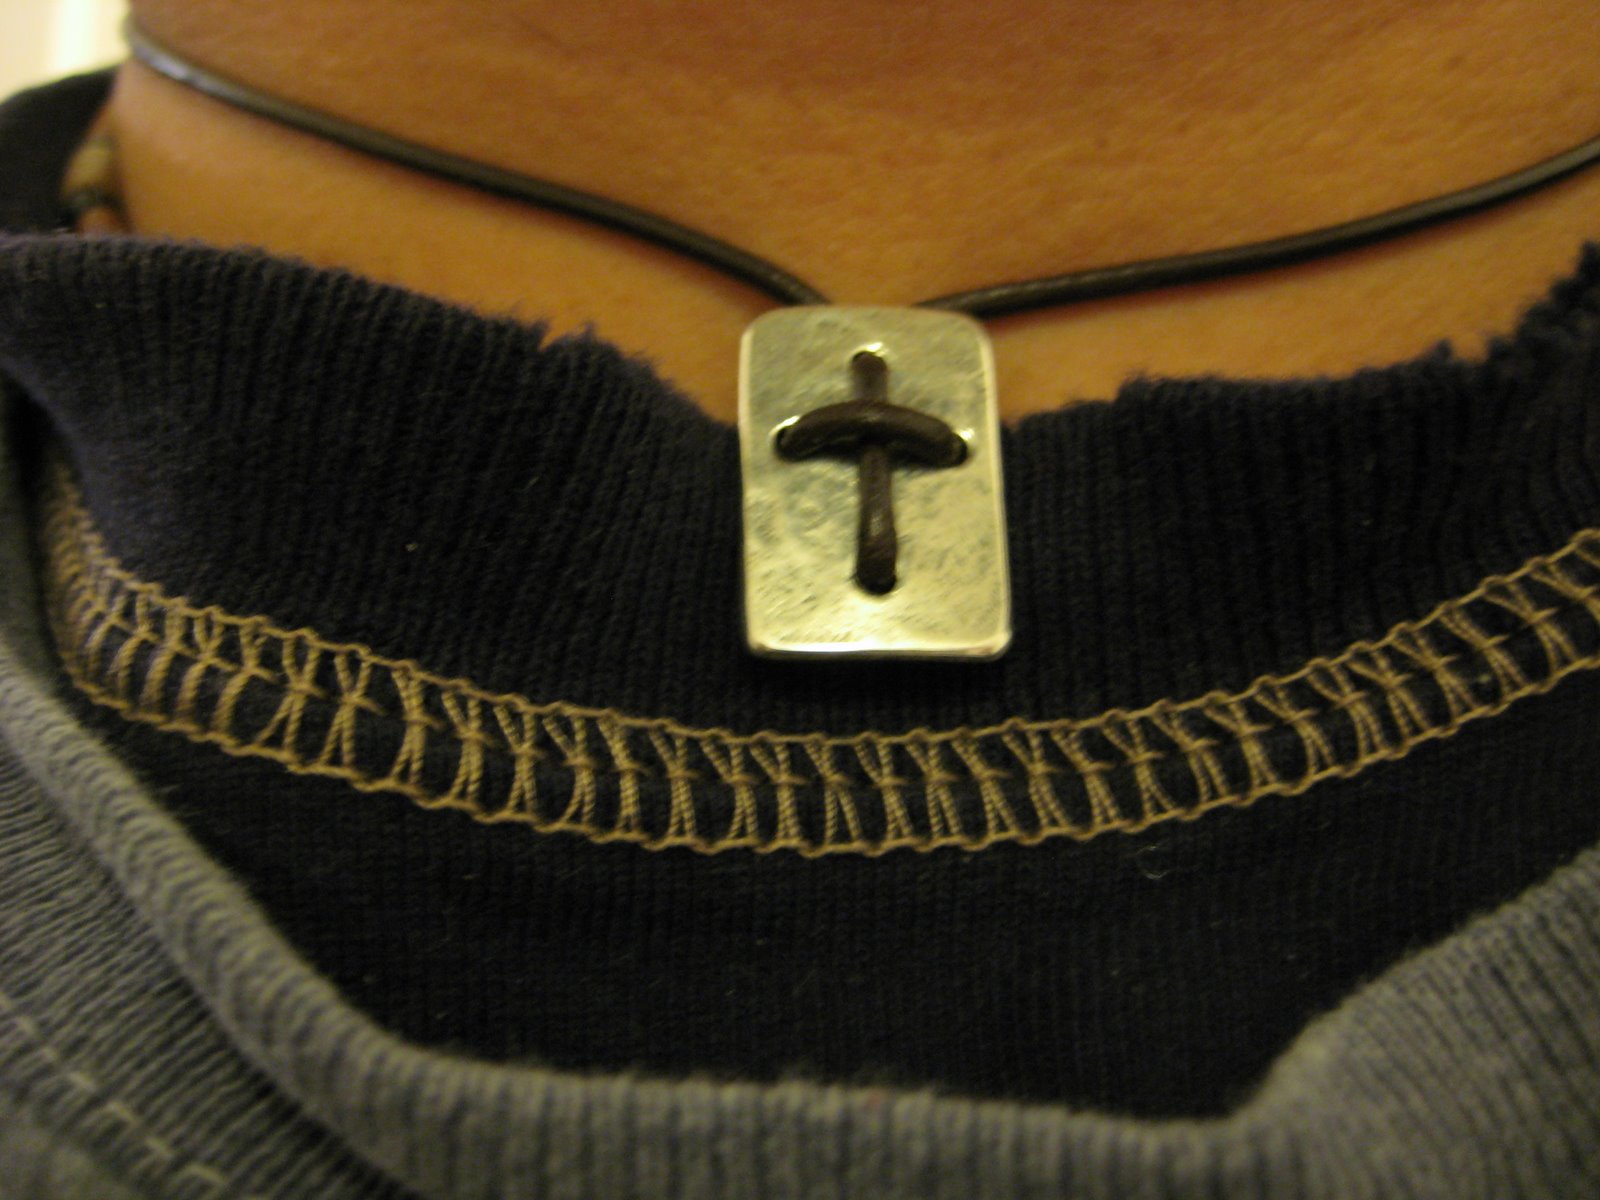 [352+Cross+necklace+from+James+Avery.jpg]